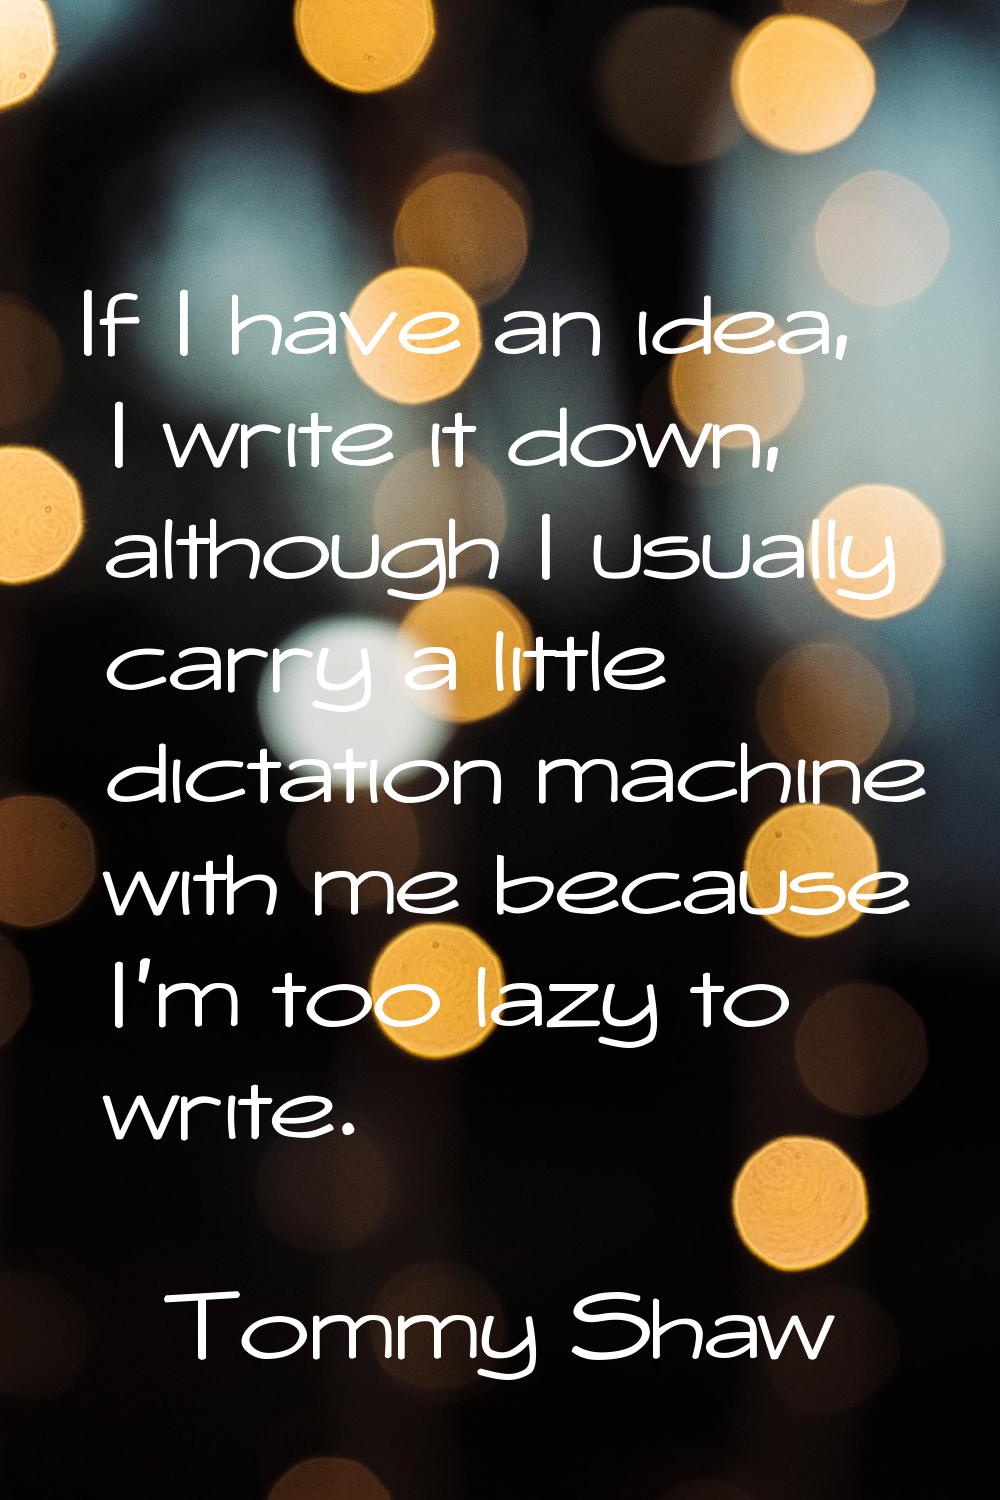 If I have an idea, I write it down, although I usually carry a little dictation machine with me bec